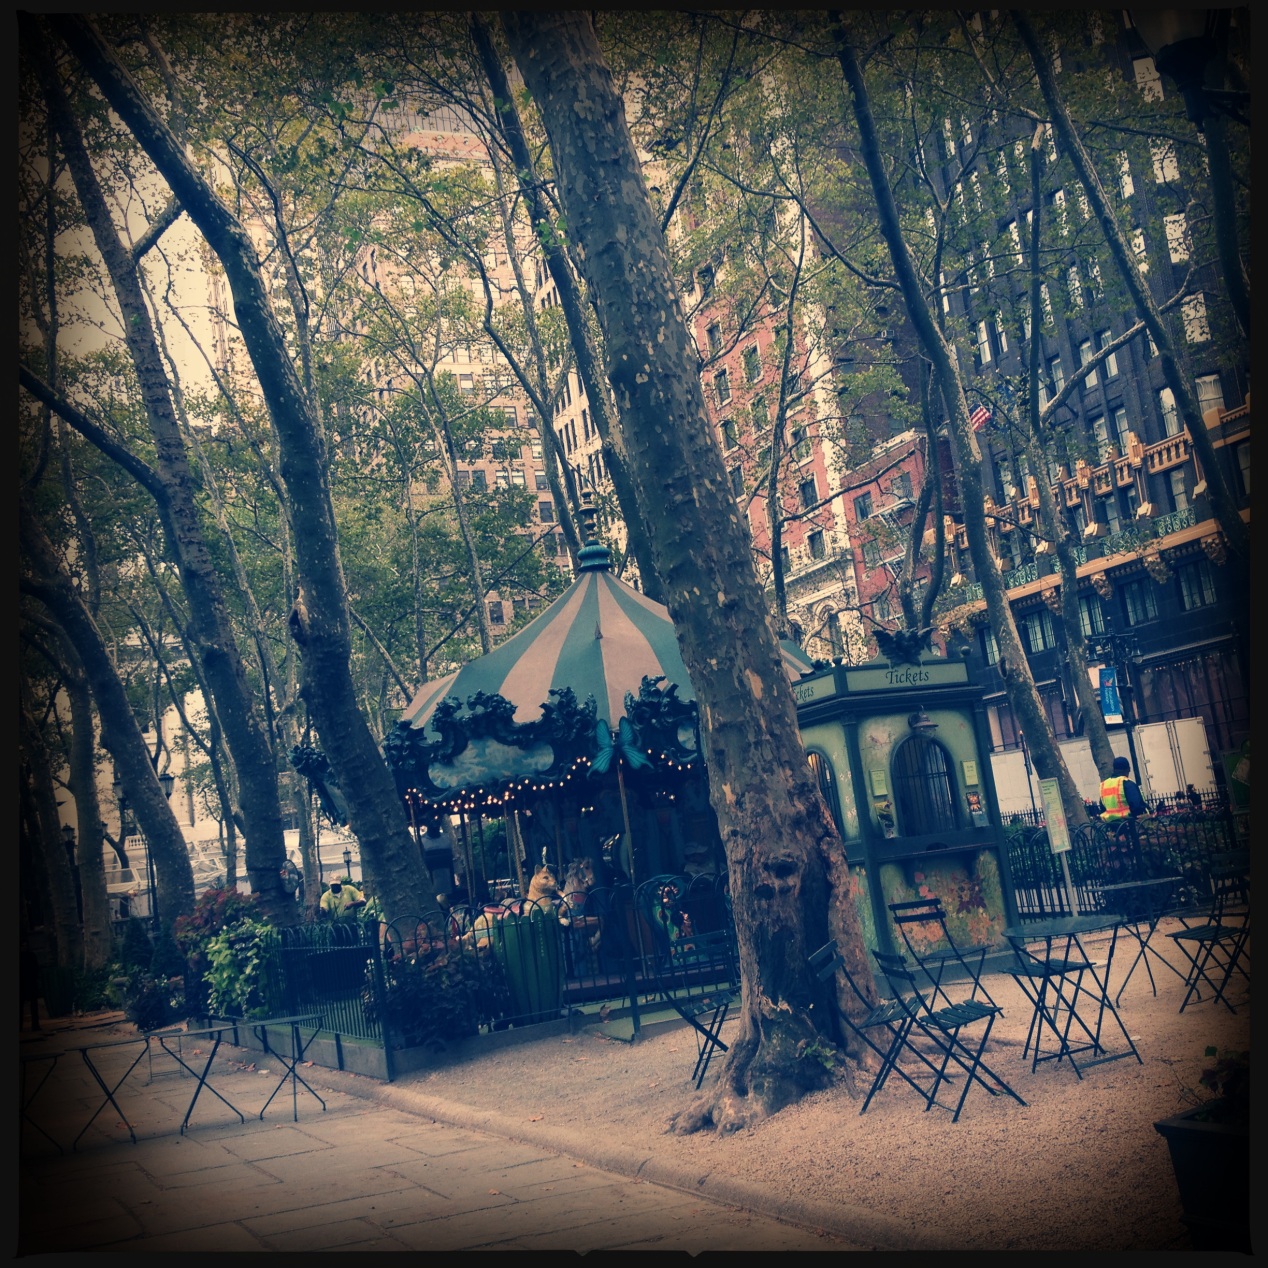 One of my favourite places in NYC, Bryant Park in midtown, tucked behind the New York Public Library.